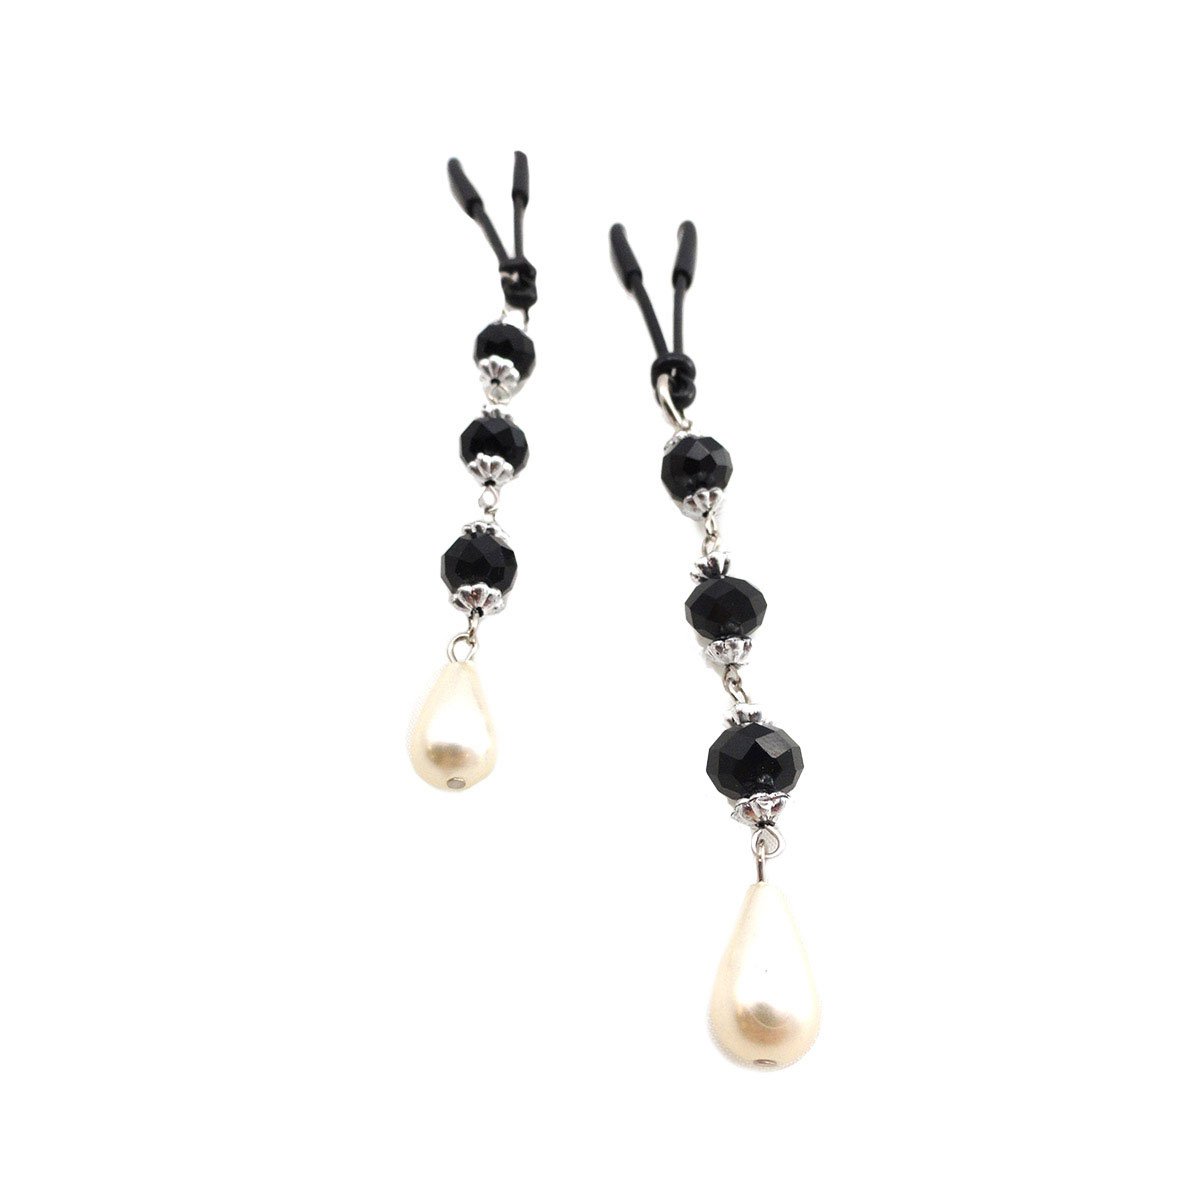 Bijoux de Nip Pearl Beads - Buy At Luxury Toy X - Free 3-Day Shipping